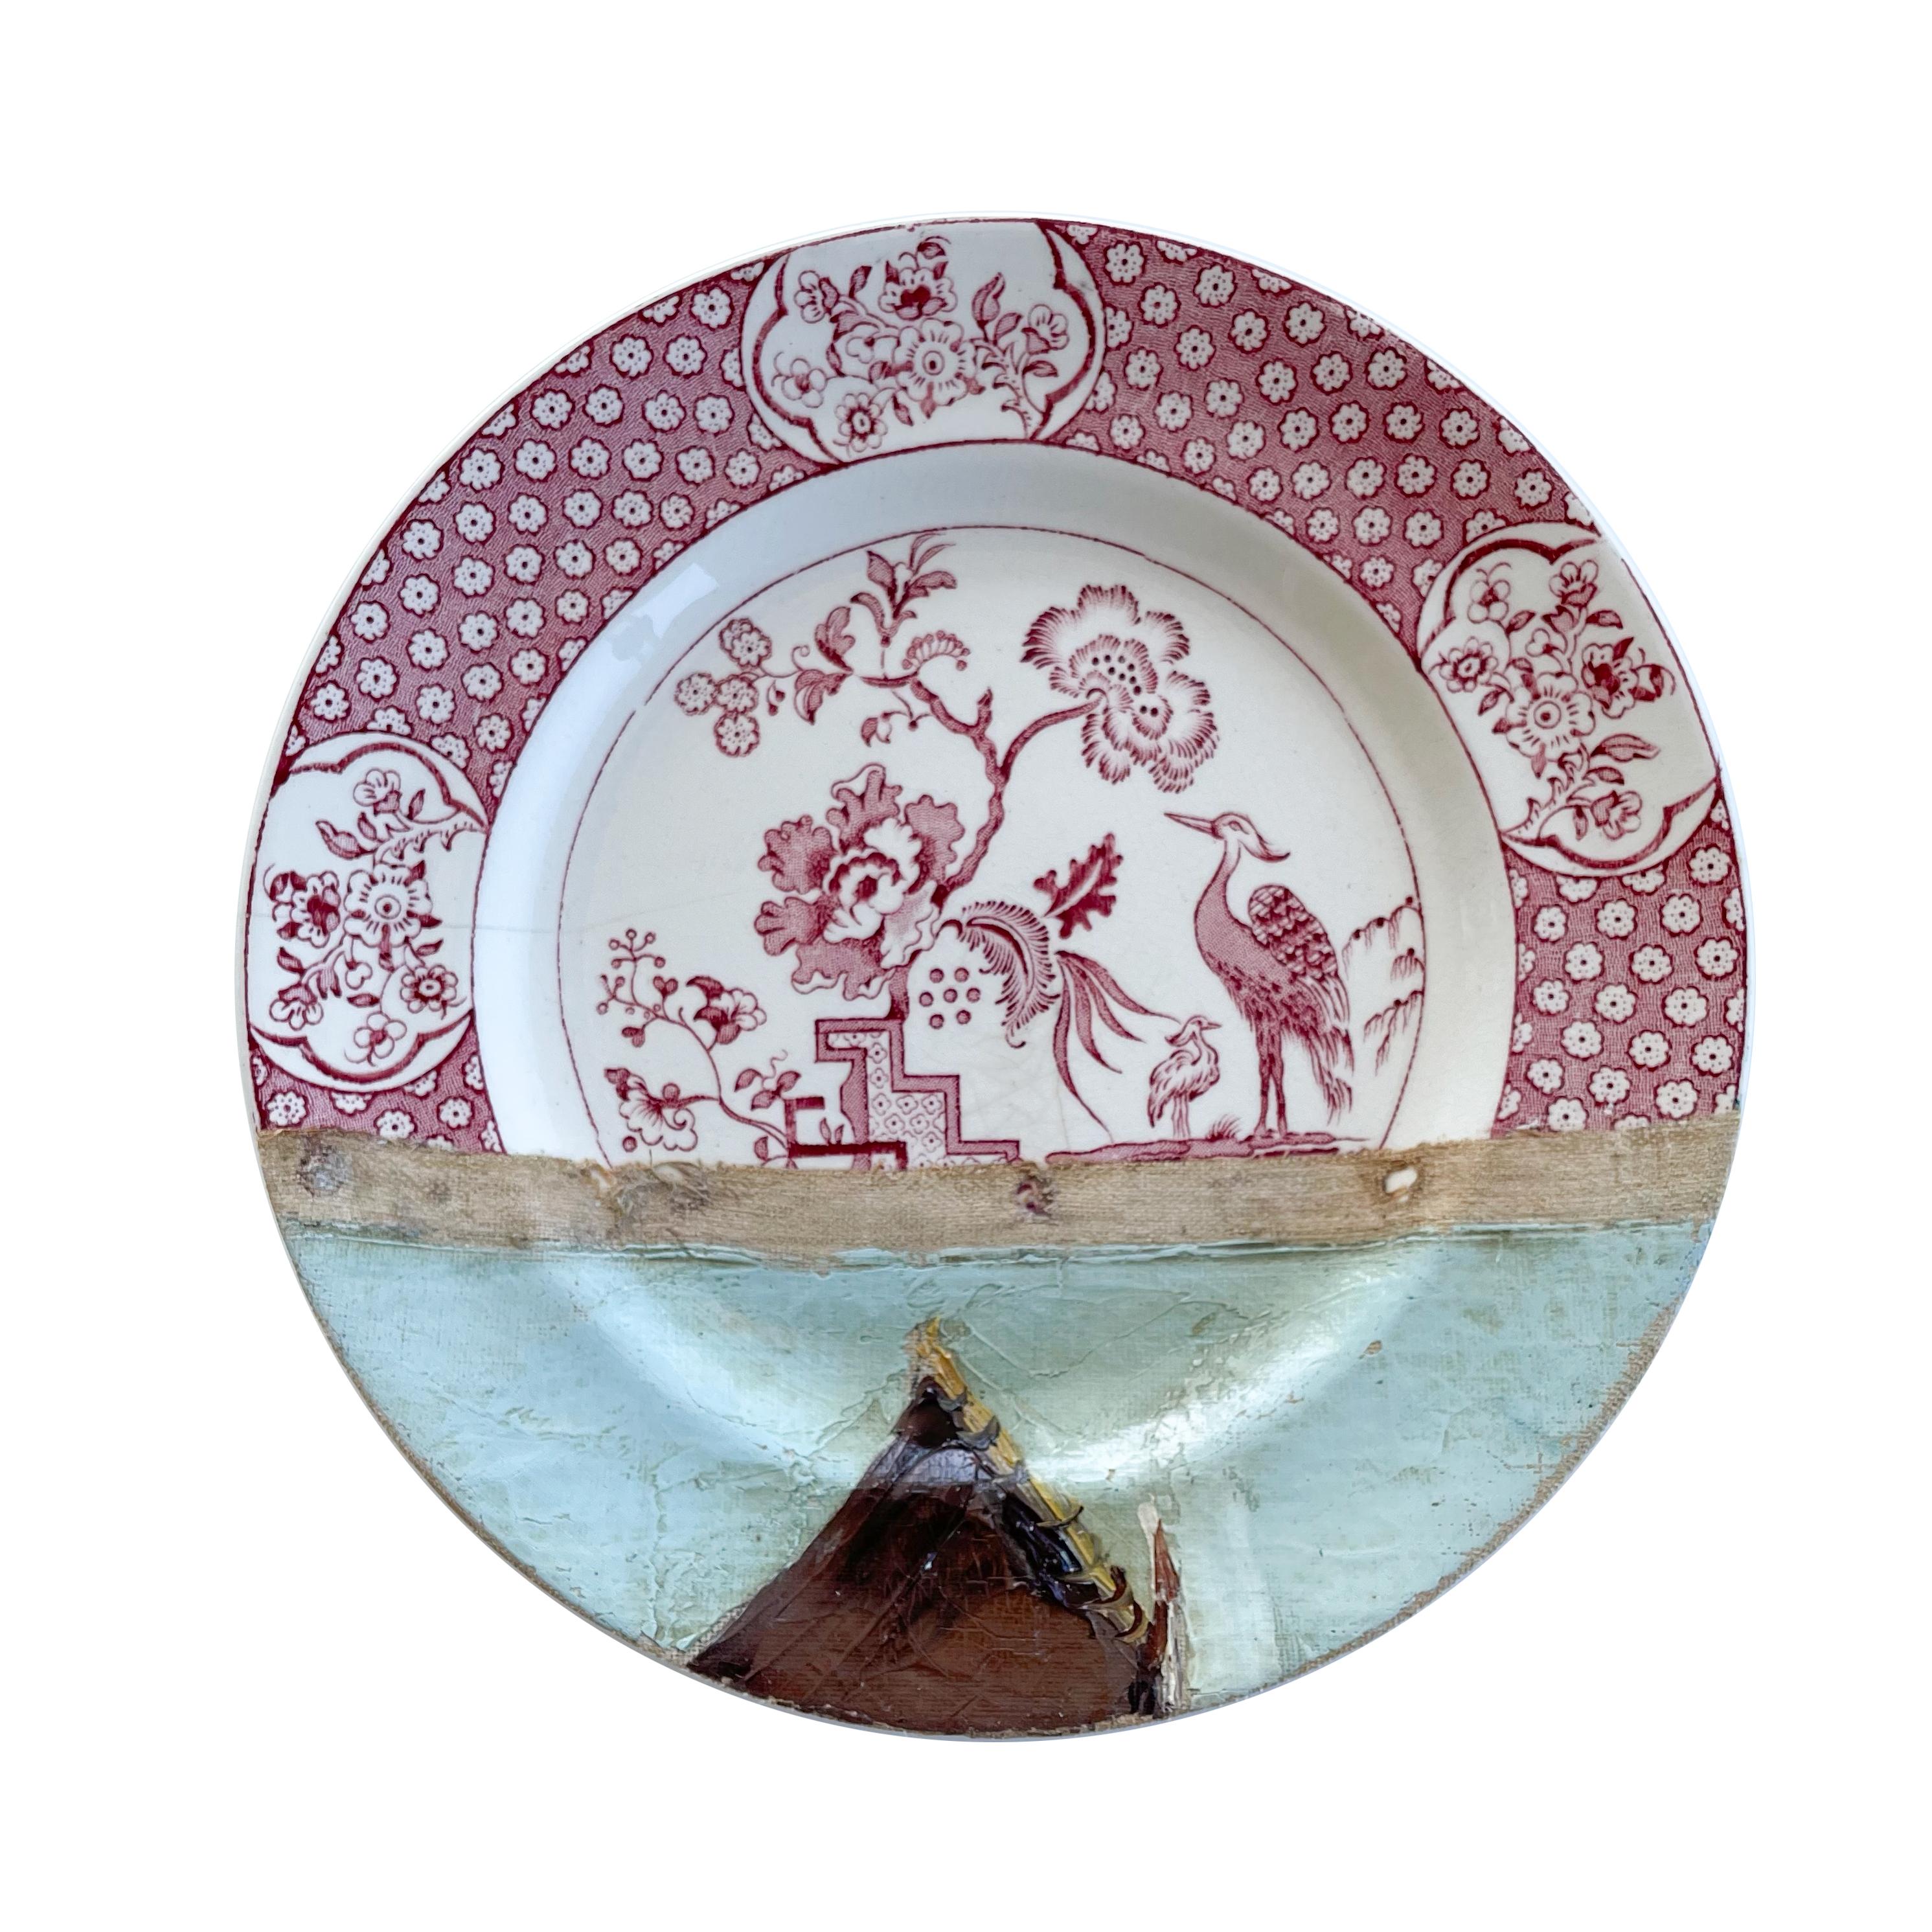 The Red Sail consists of 7 plates - among which four rarer red & white transferware plates - combined with a painting of sailboats off the coast with a village in the background.

This artwork belongs to our 